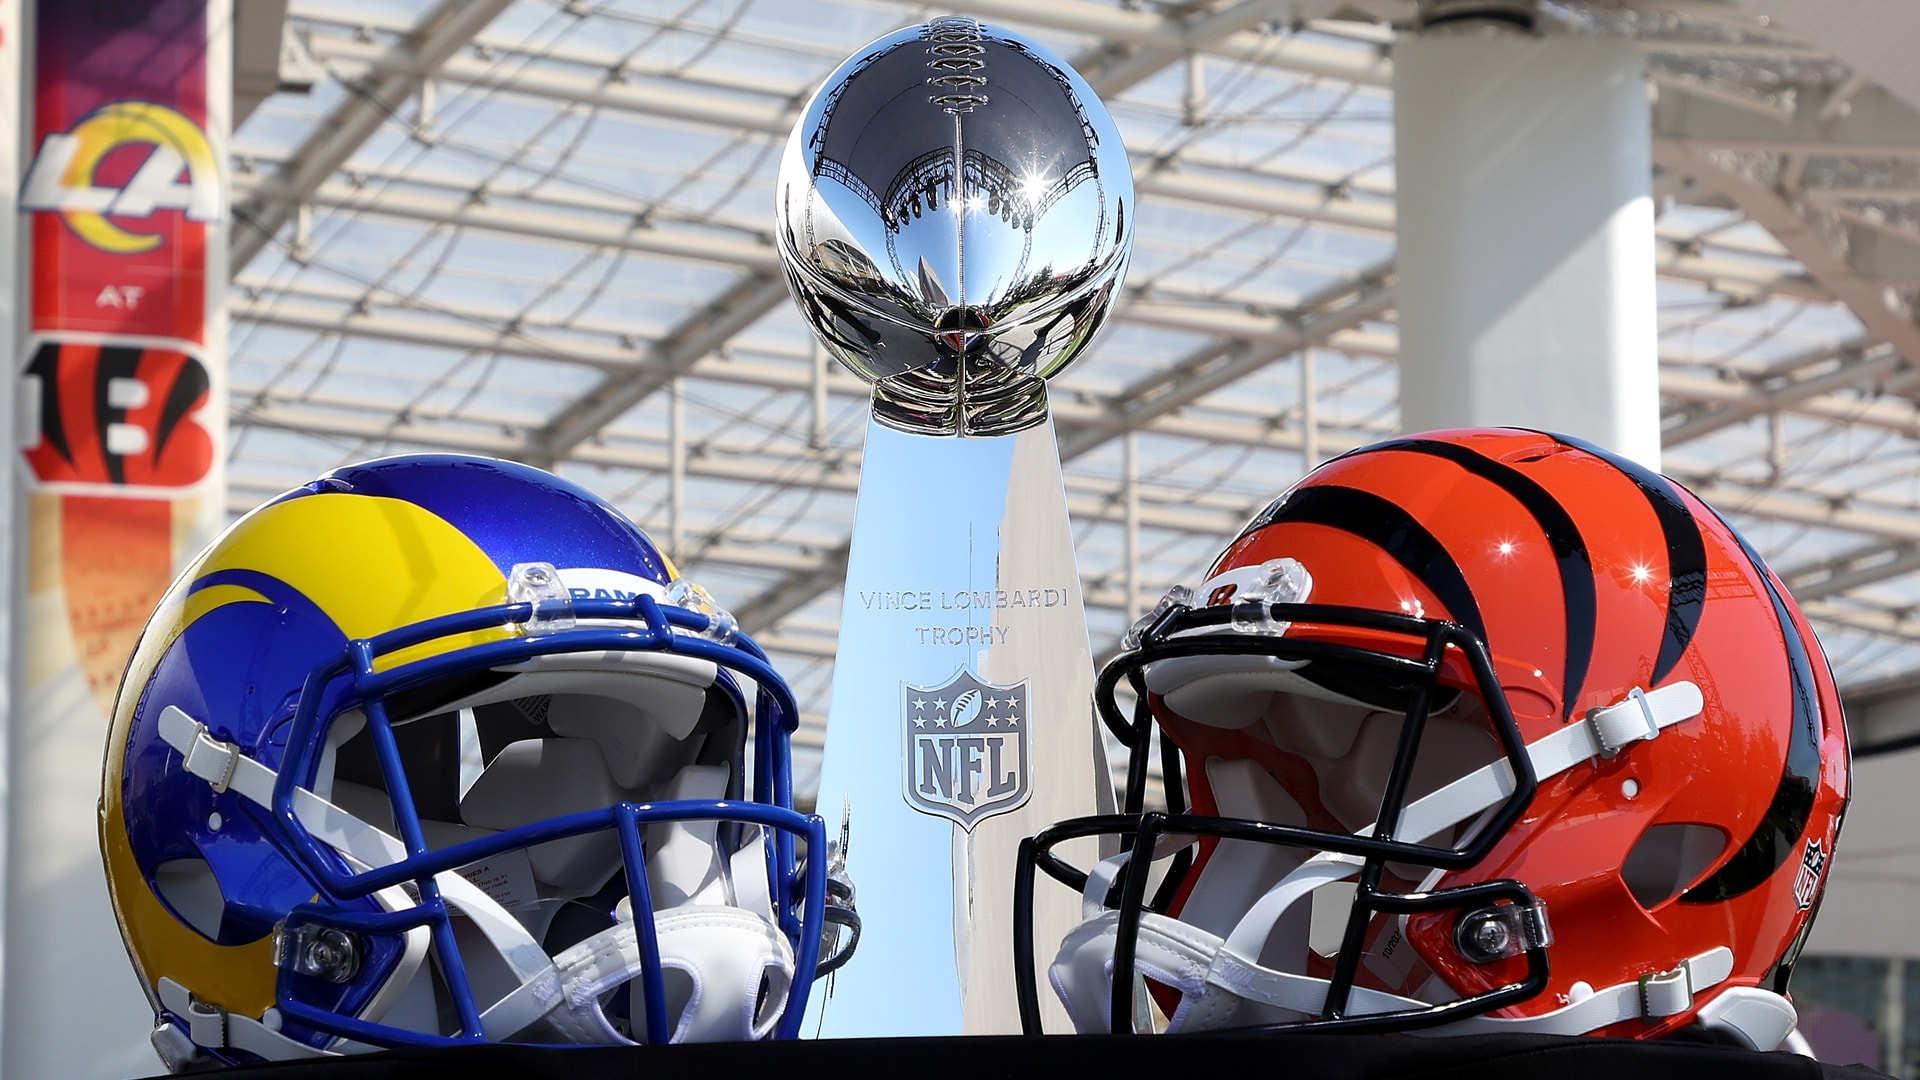 Super Bowl 56 in LA: How to watch, TV info and kickoff time, streaming